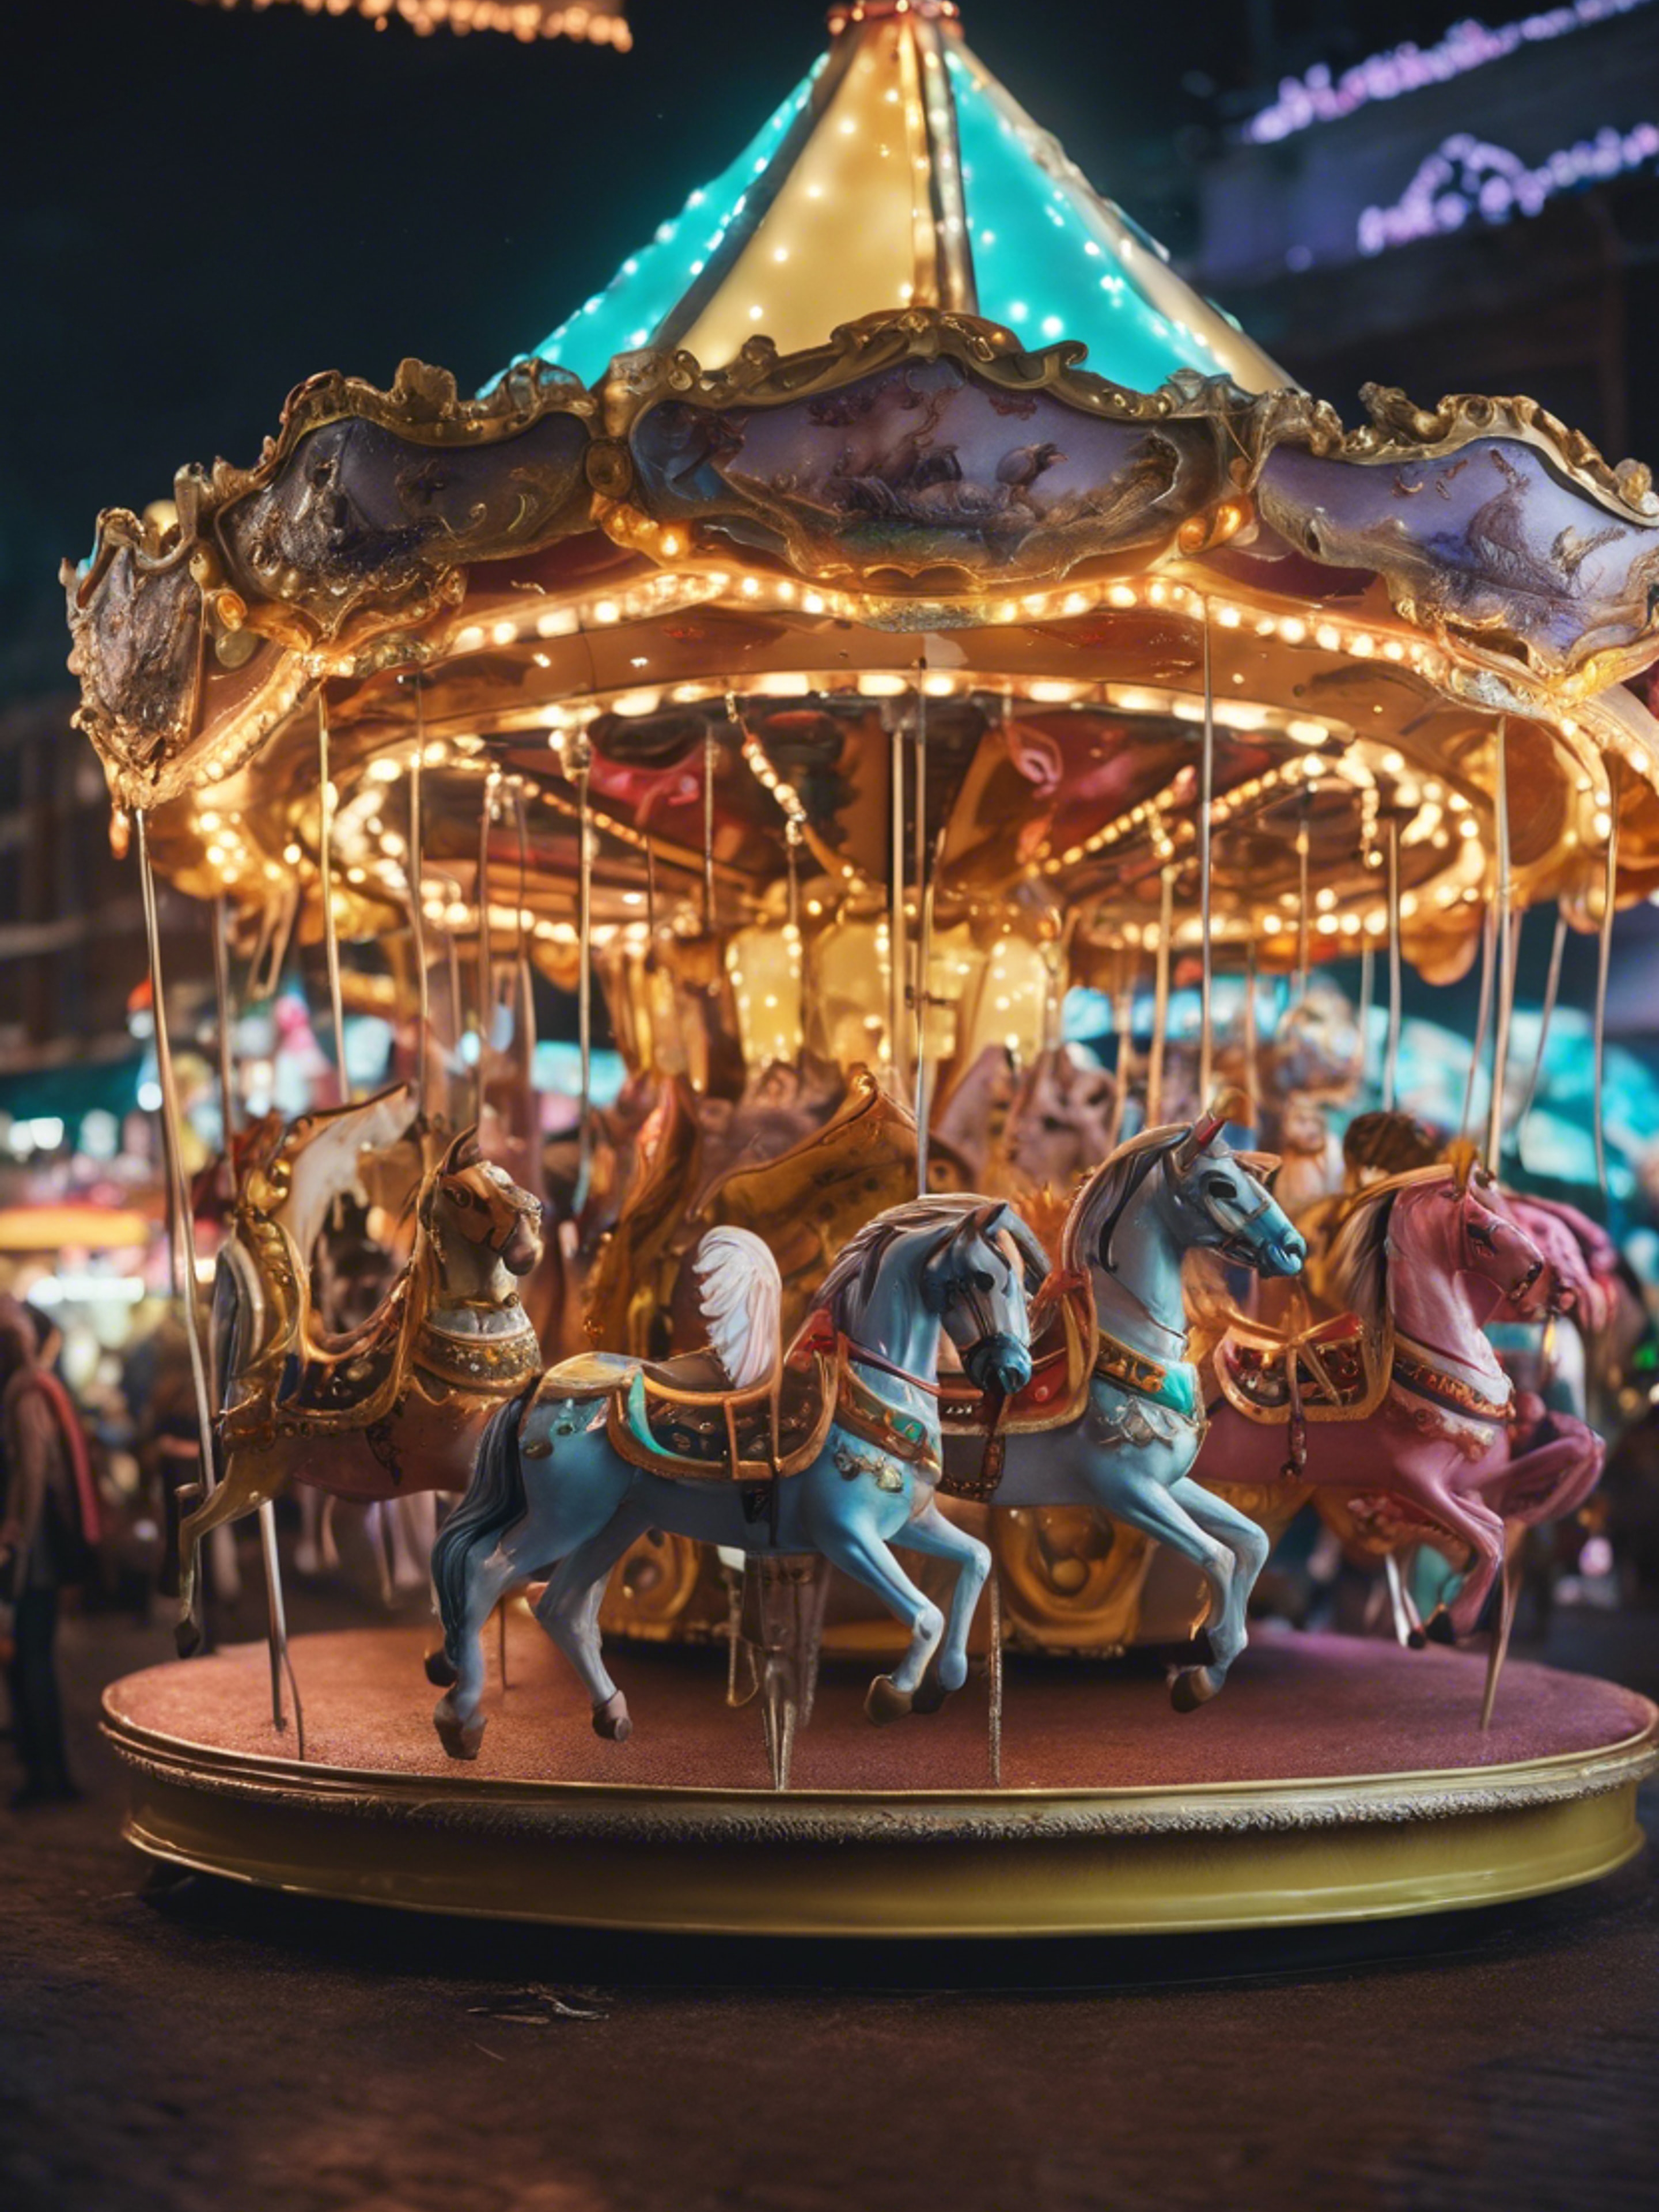 An enchanted carousel with various magical creatures as the seats, nestled in a festive carnival beneath a shower of neon stardust. Tapet[c01a4d9e6e424363abf7]